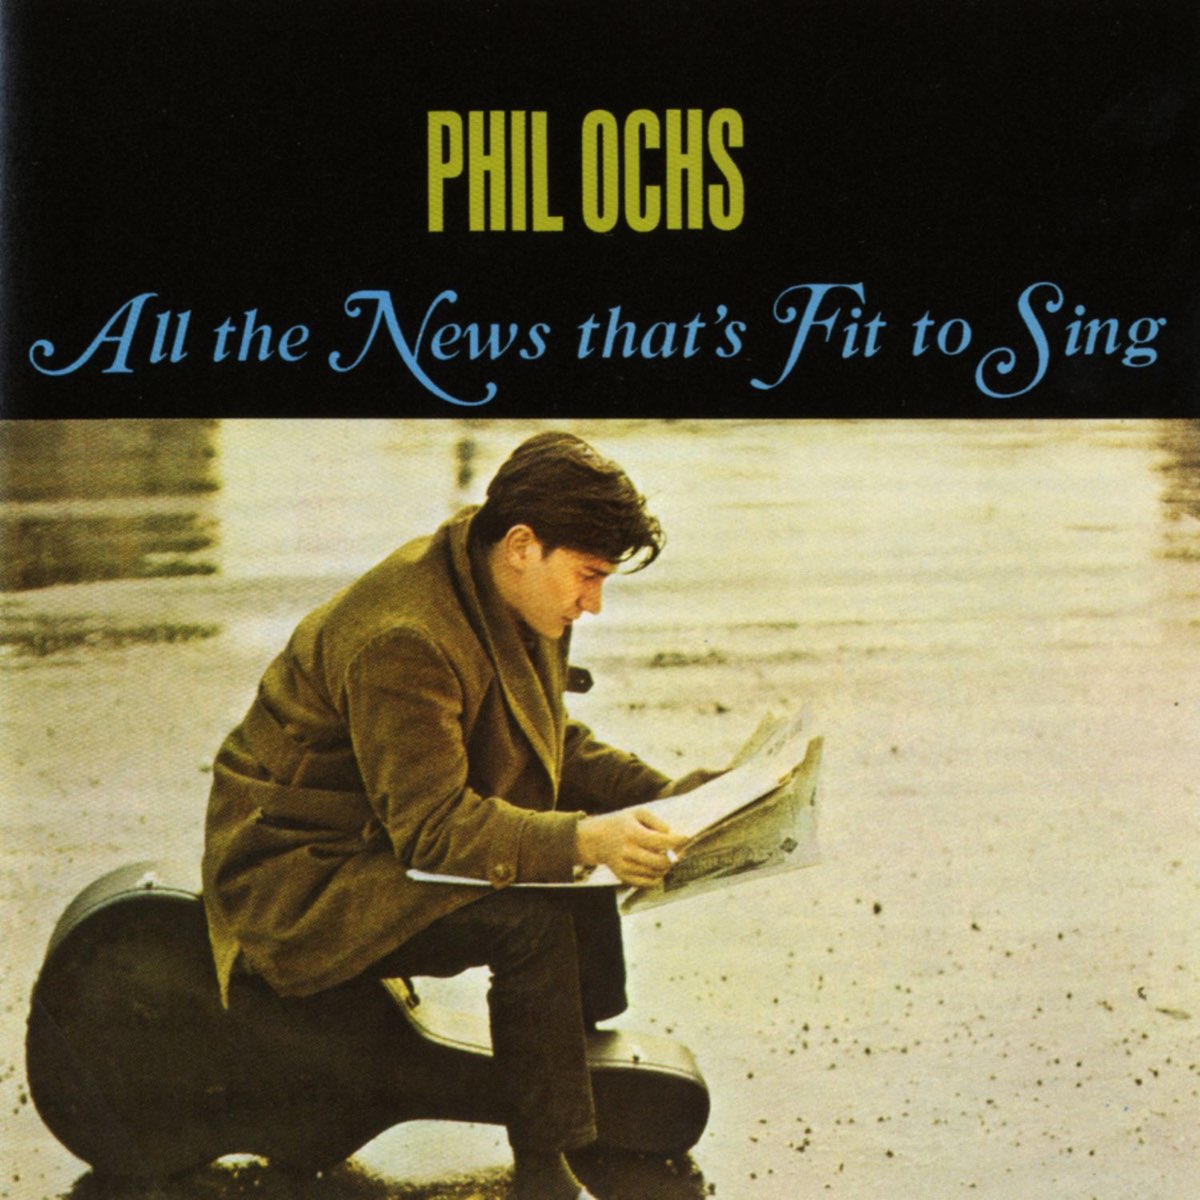 All the News That's Fit to Sing par Phil Ochs sur Apple Music